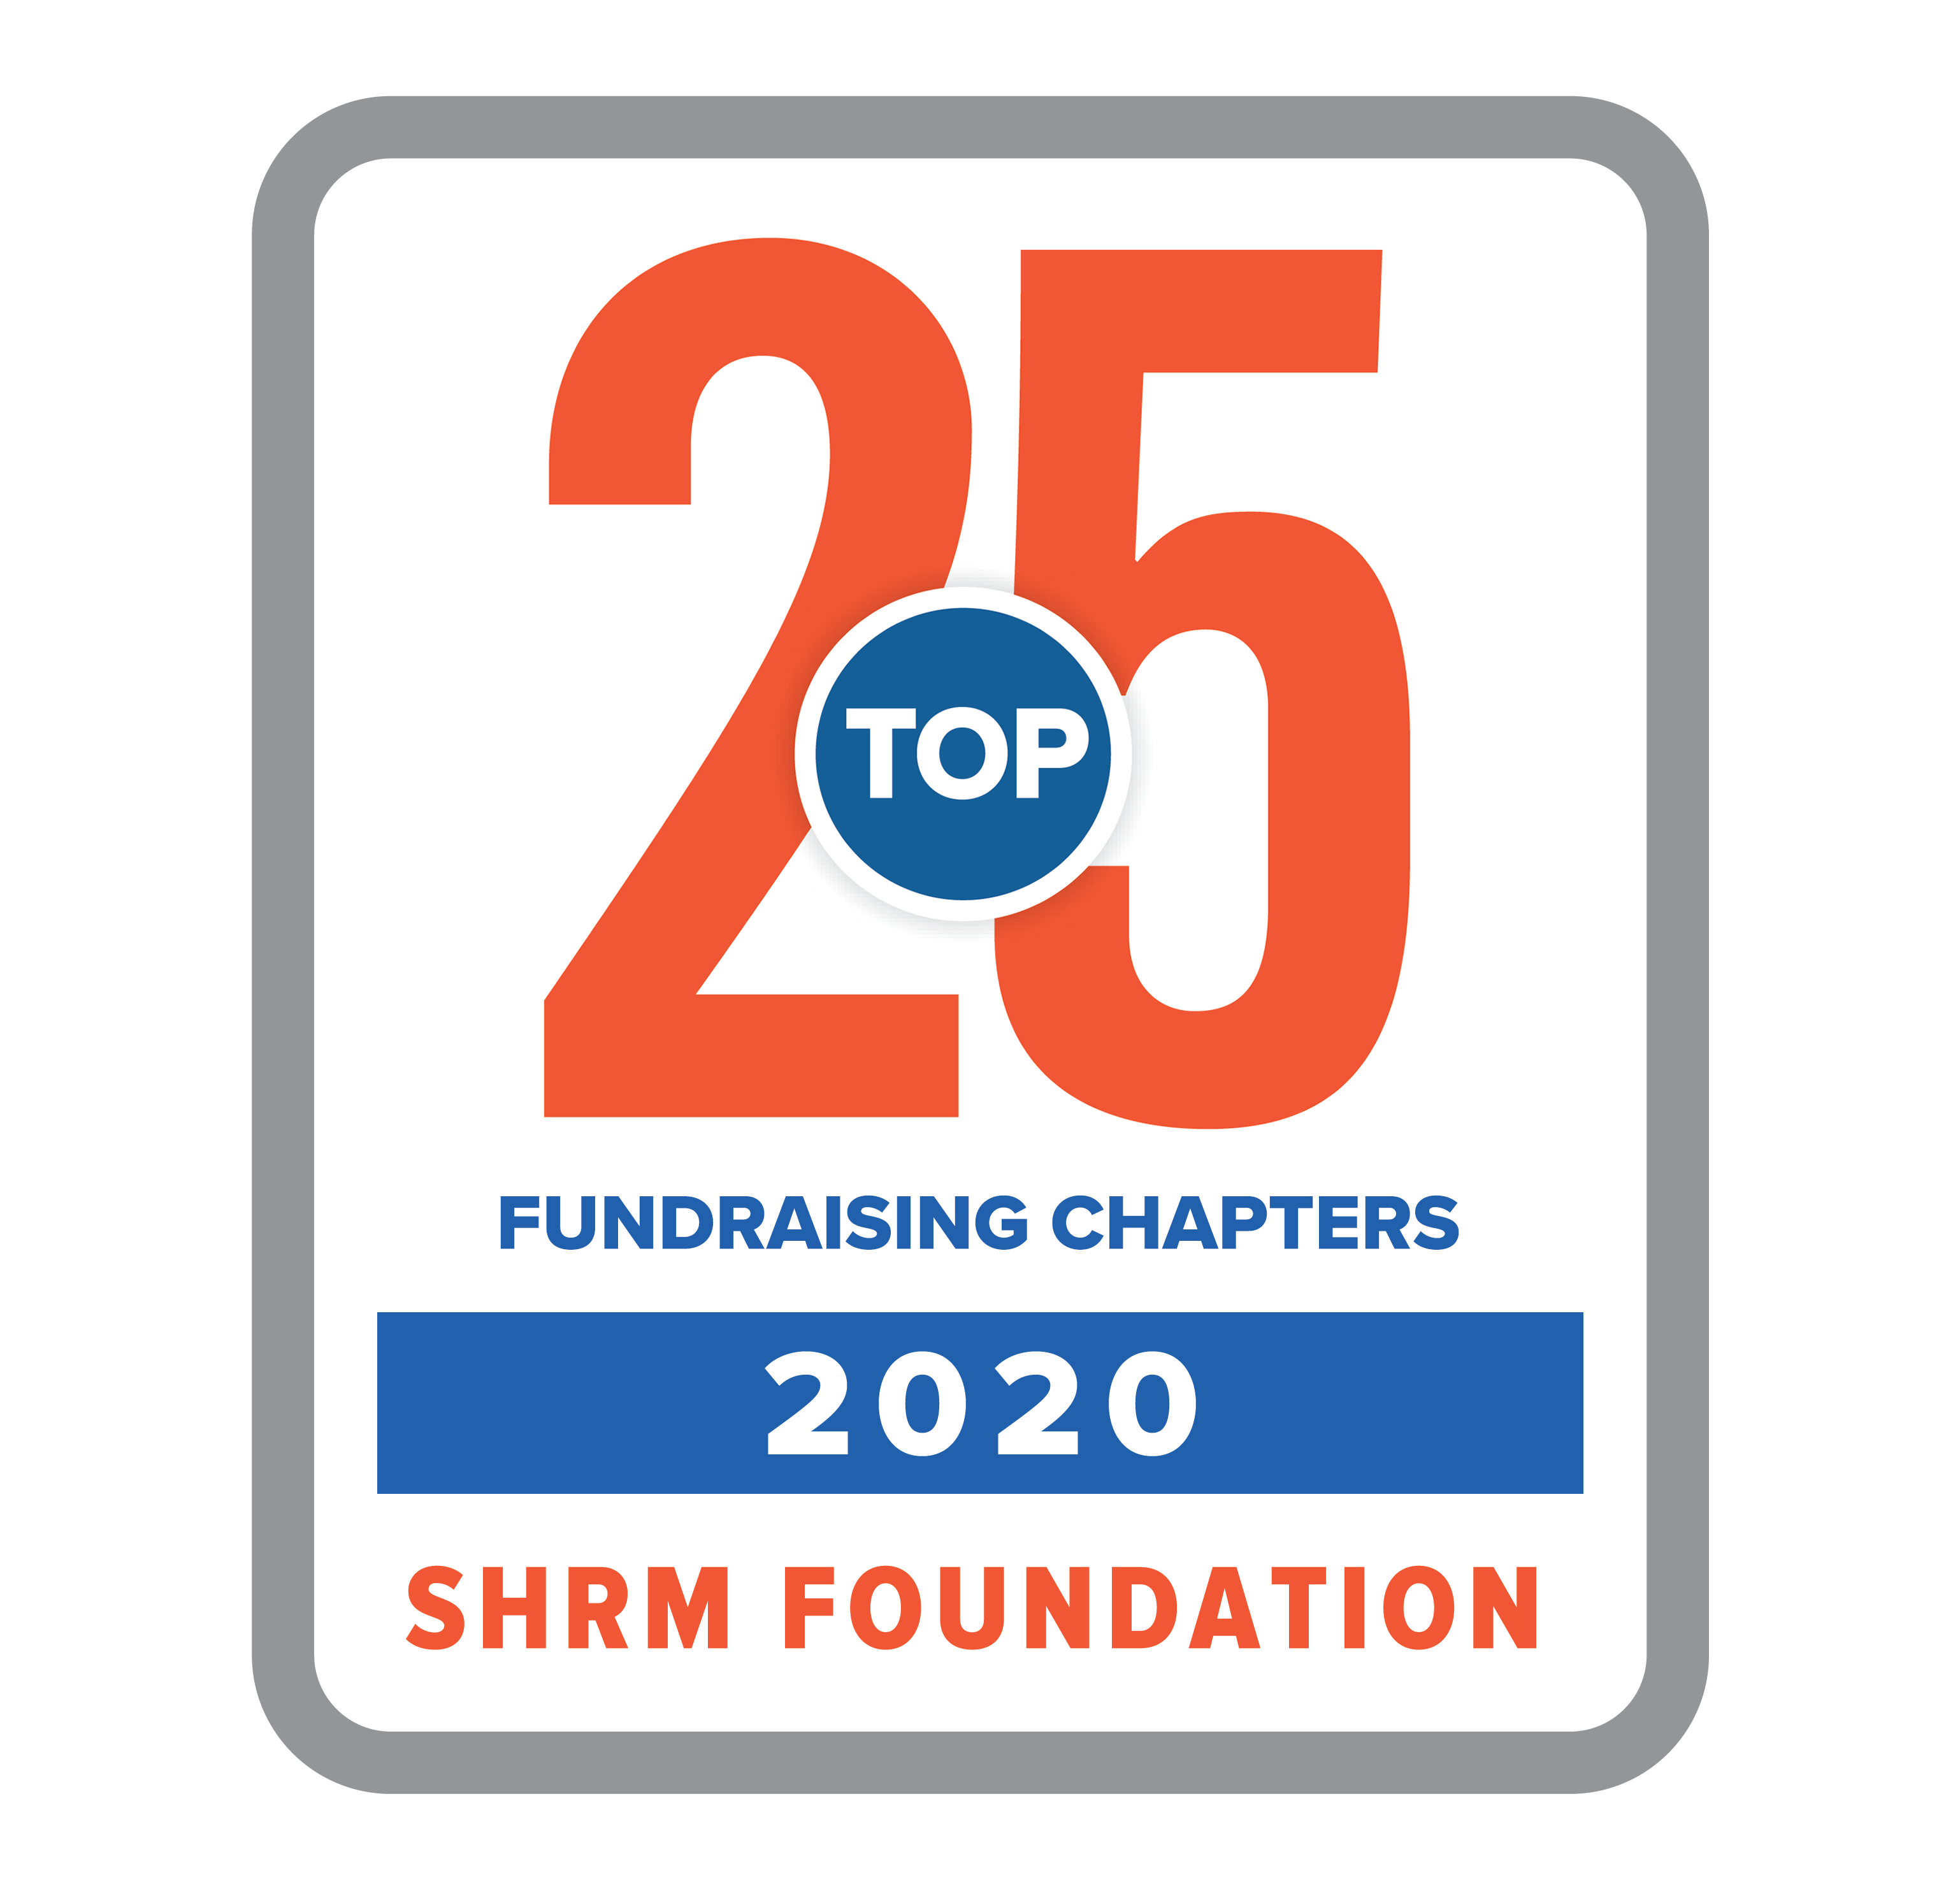 Top 25 Fundraising Chapters 2020